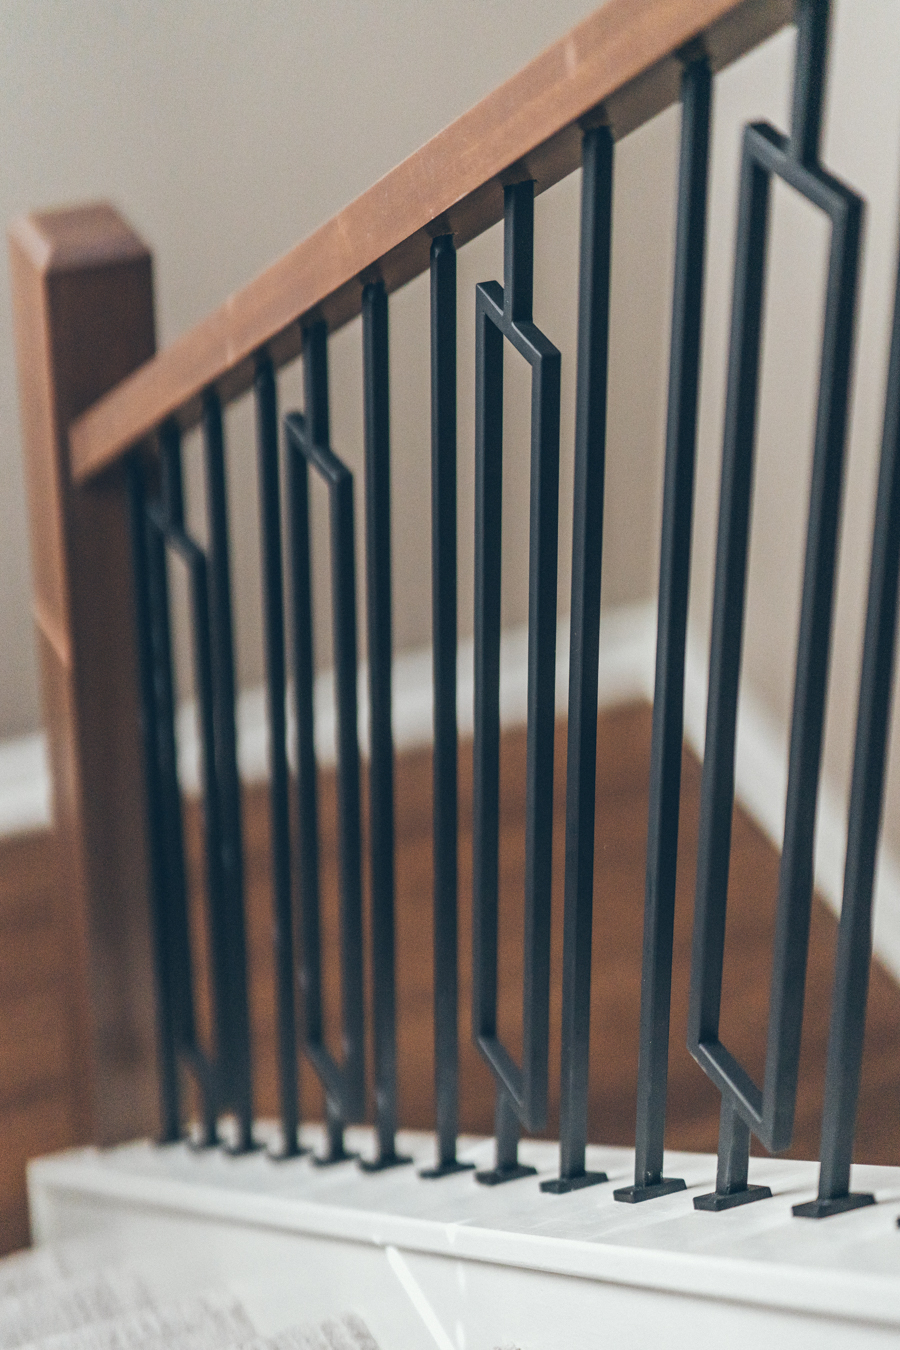 closeup image of staircase railing